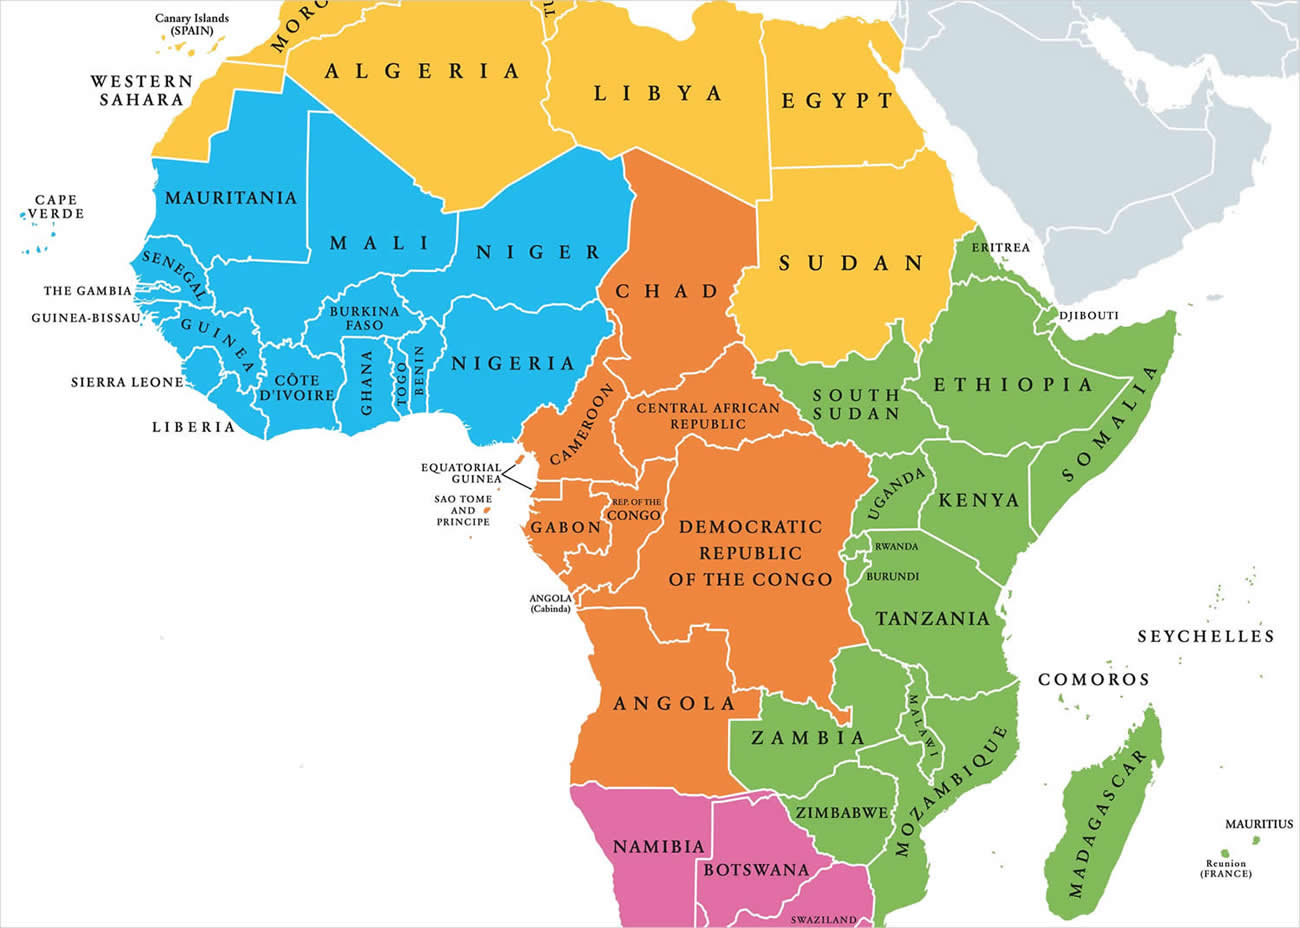 naem-2018-article-africa-regions-political-map-single-countries-700x500